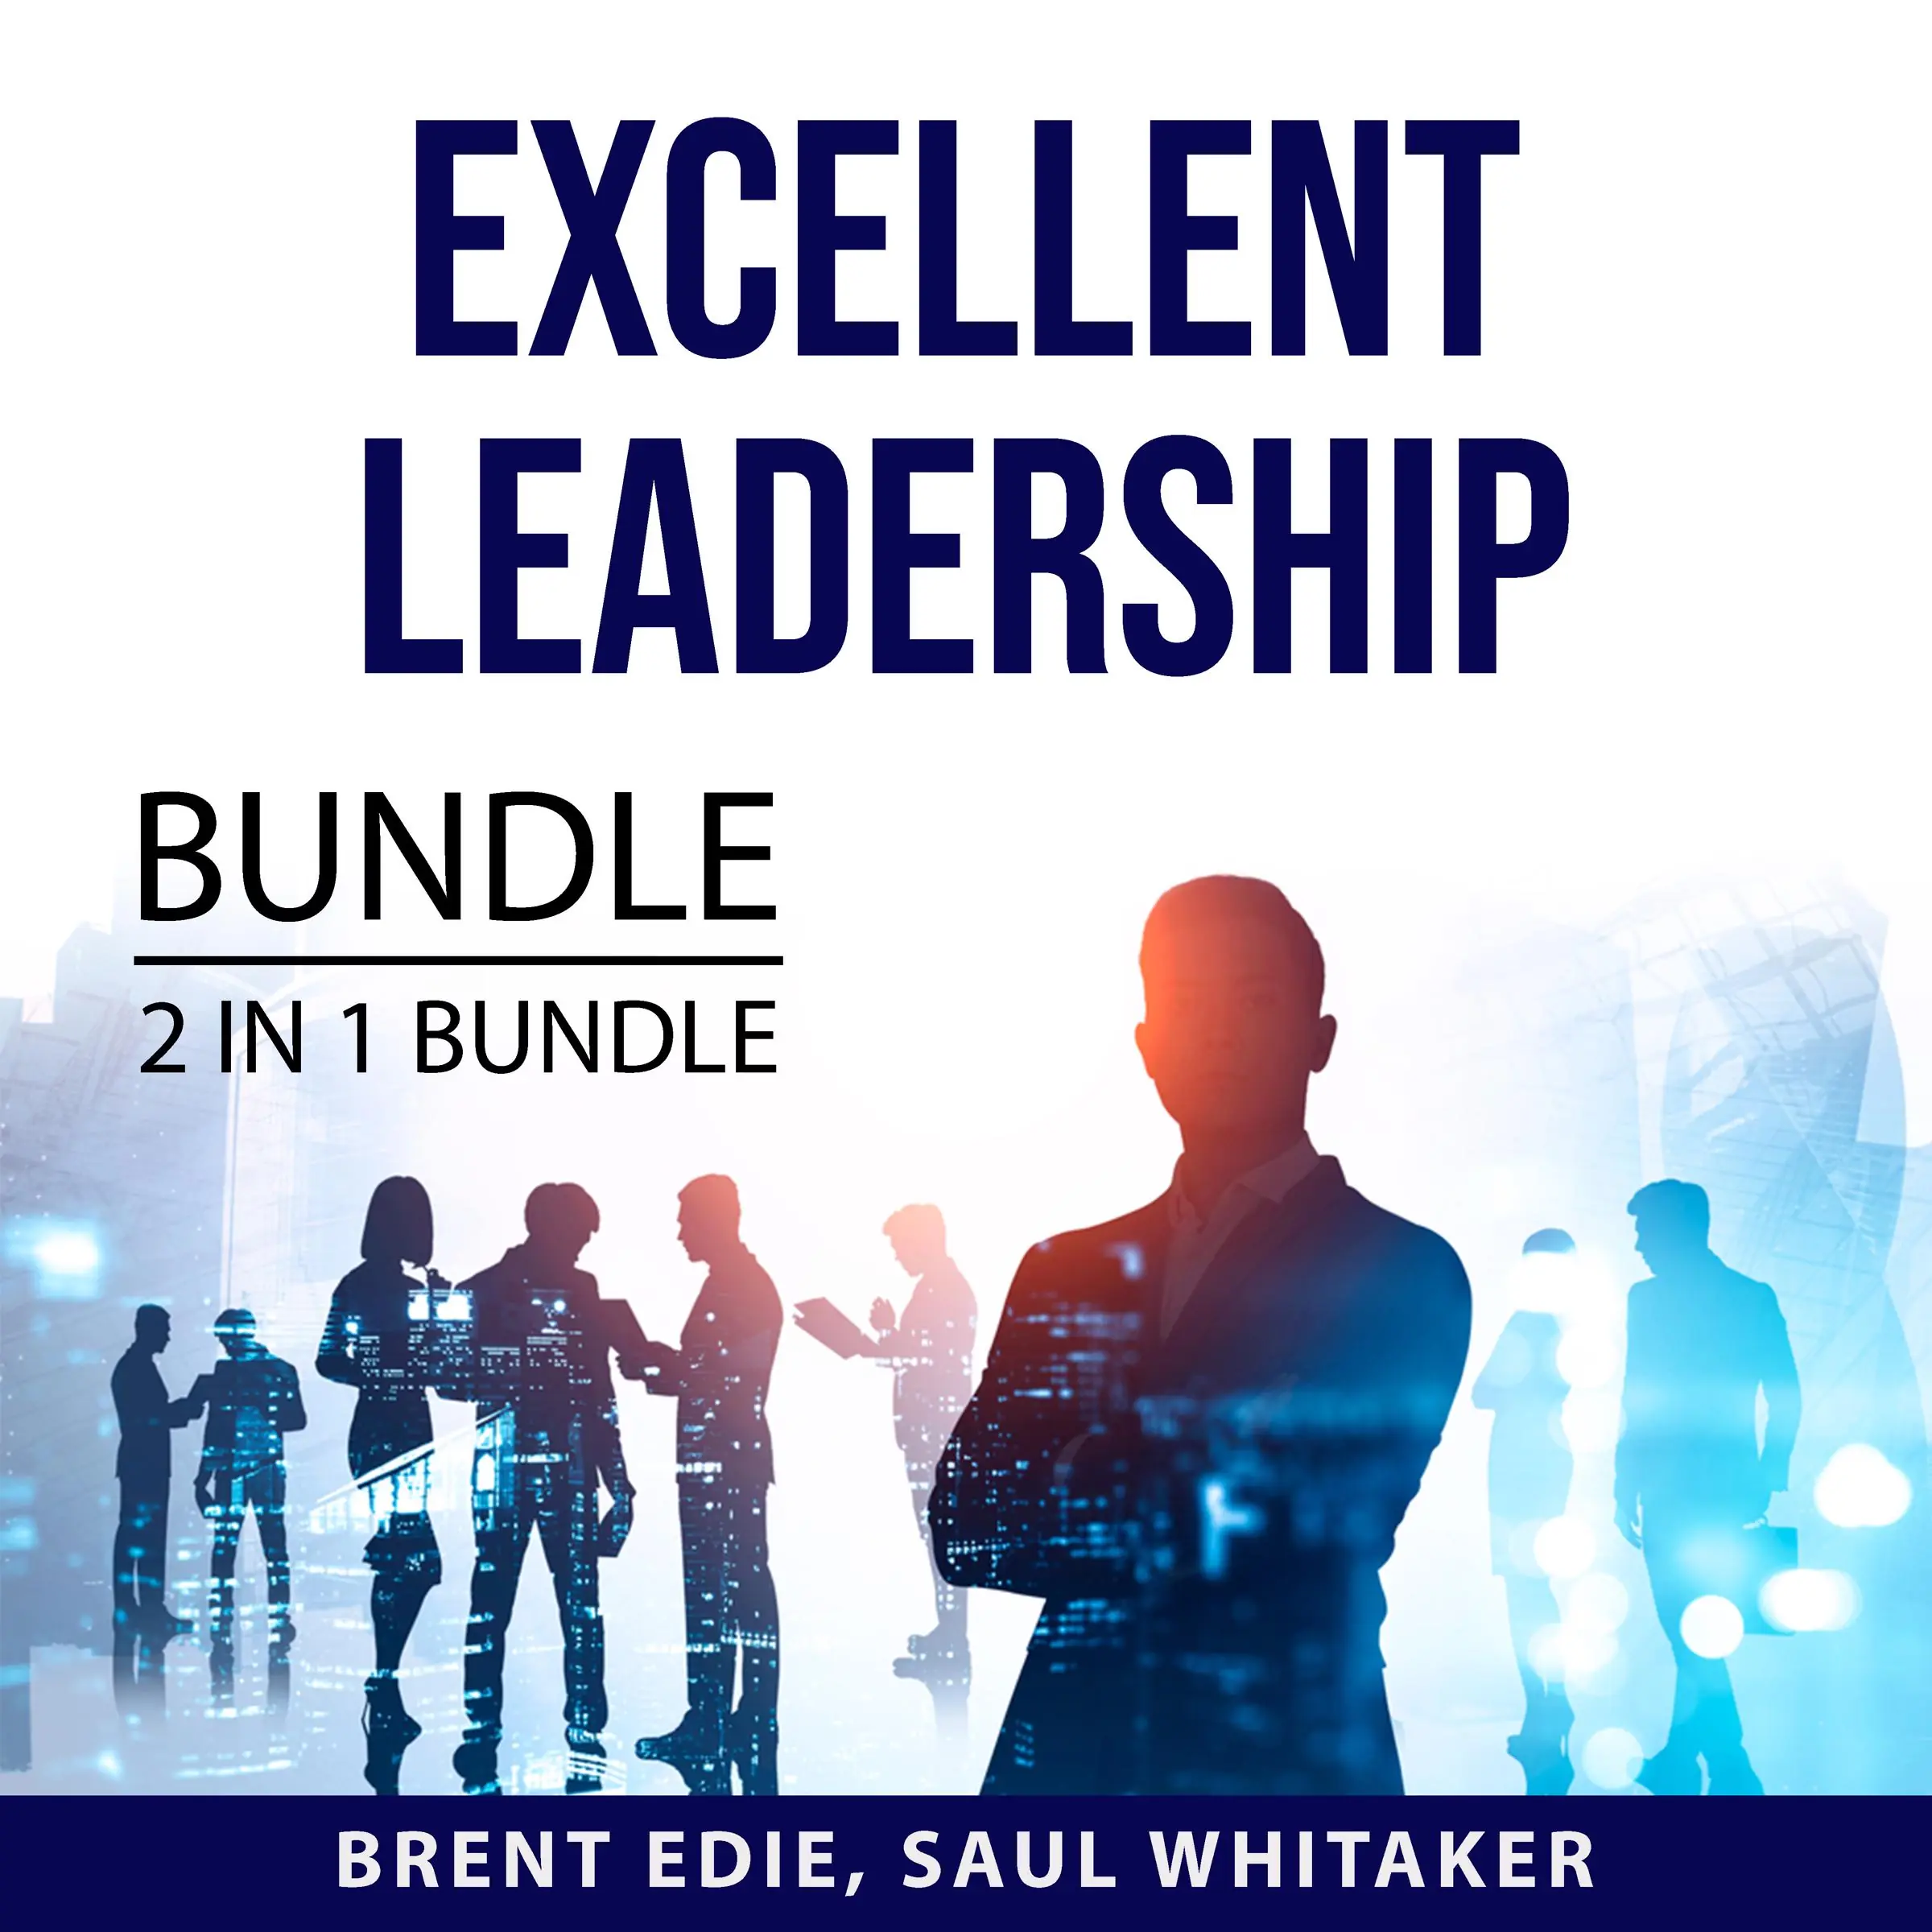 Excellent Leadership Bundle, 2 in 1 Bundle: Qualities of a Leader and Leading with Character Audiobook by and Saul Whitaker